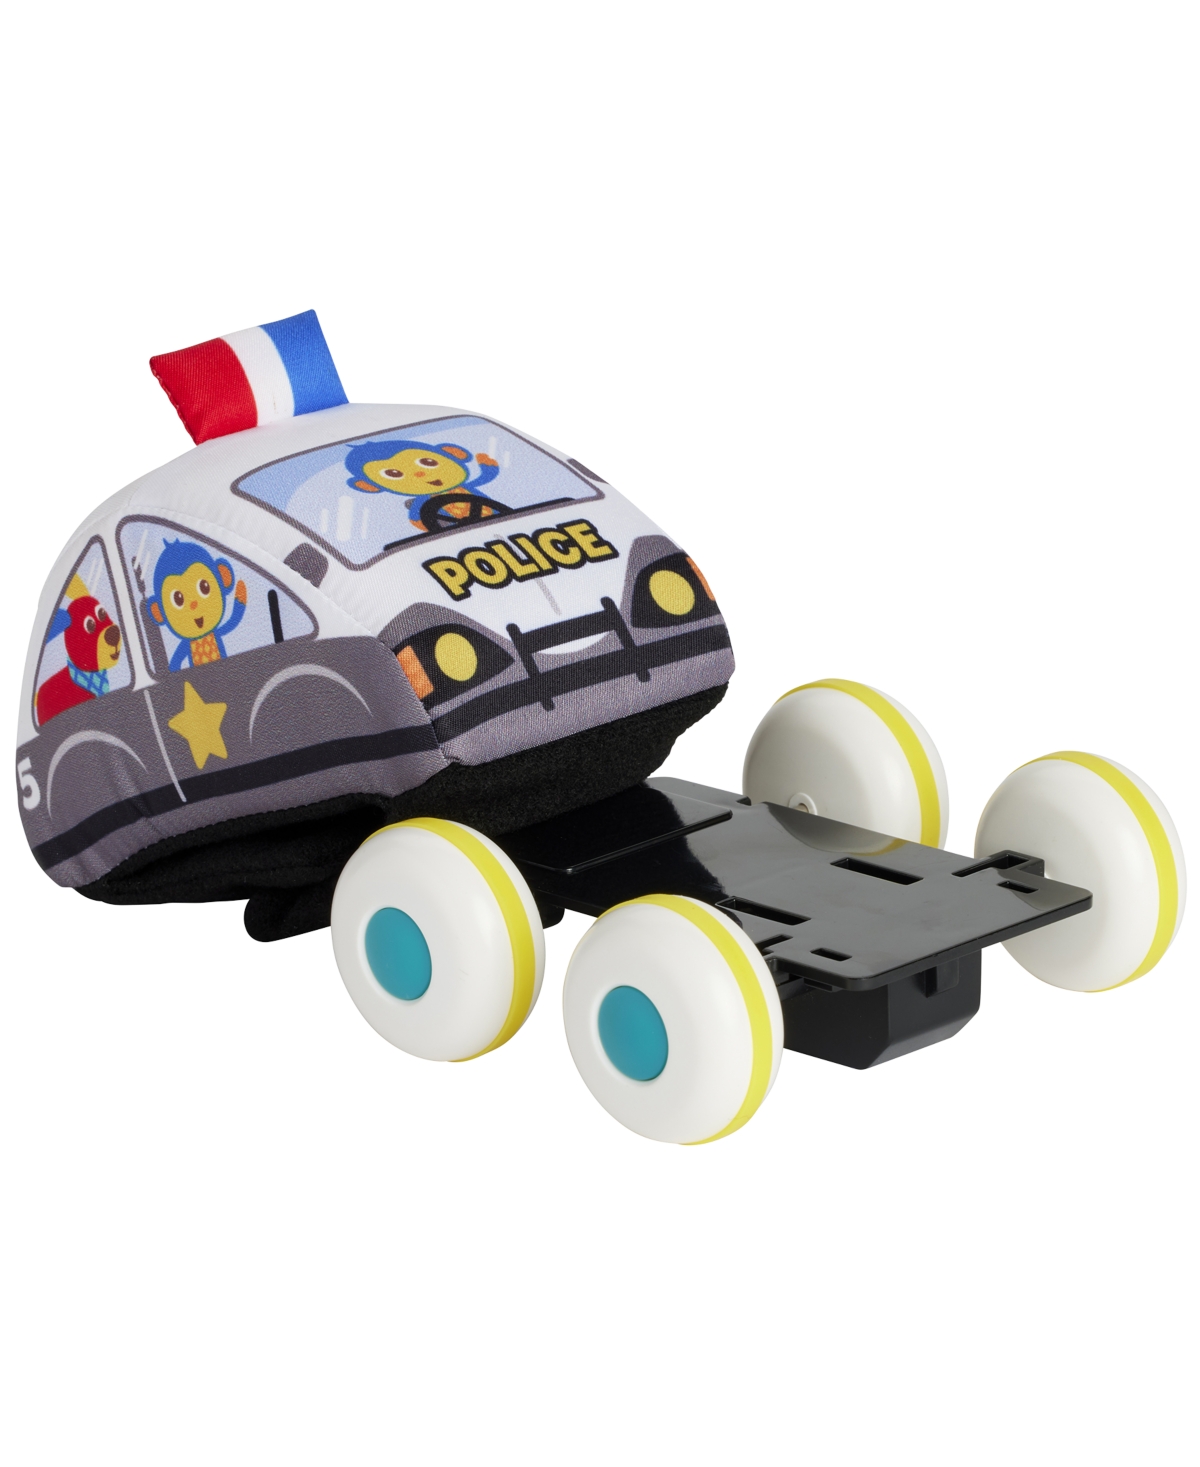 Imaginarium Kids Pull and Go Cars, Created for You by Toys R Us